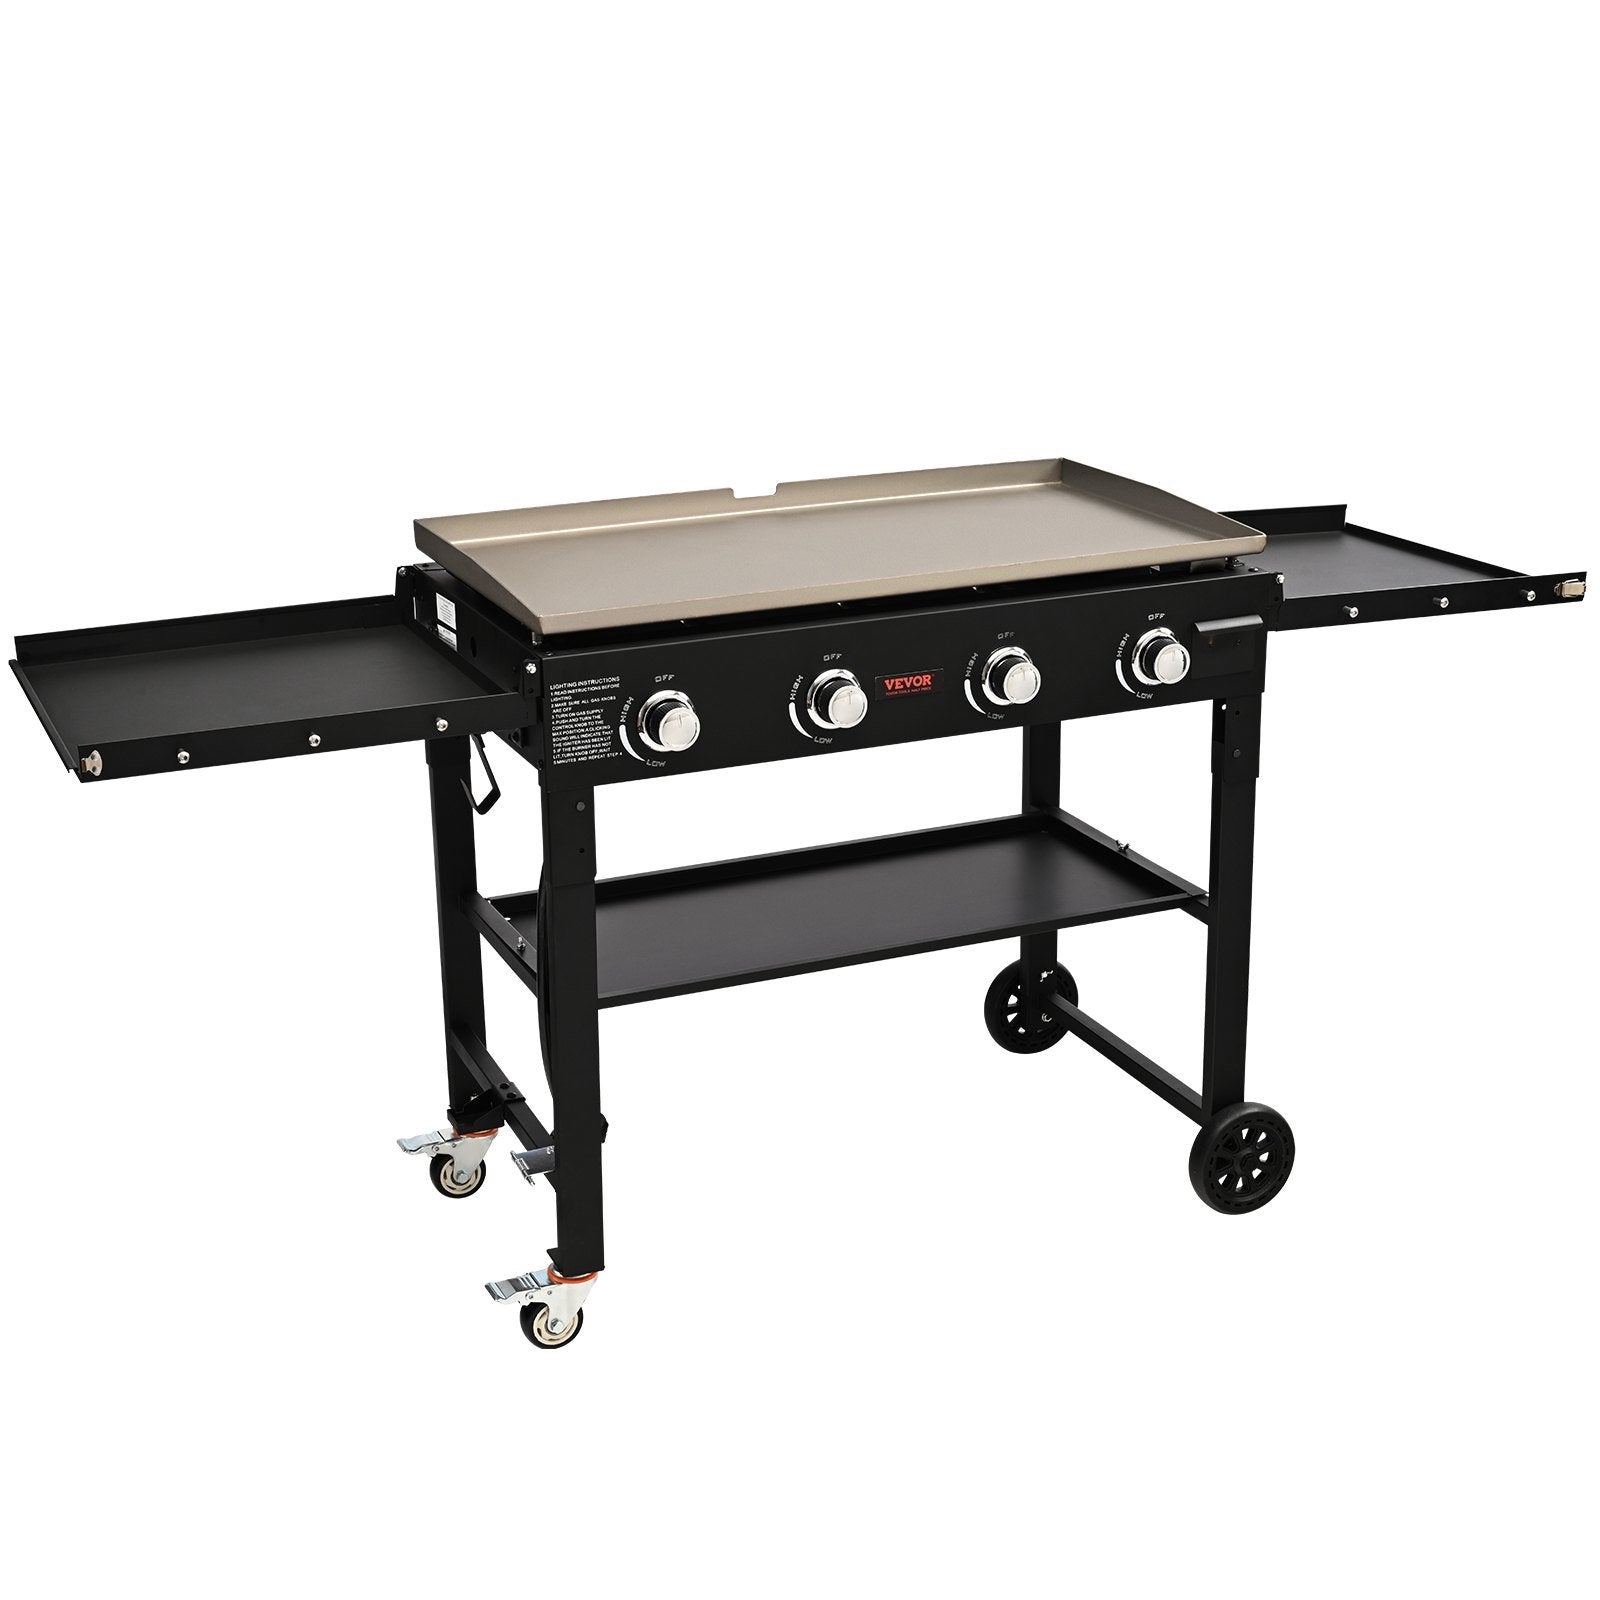 A VEVOR Commercial Griddle on Cart, 36" Heavy Duty Manual Flat Top Griddle, Outdoor Cooking Station with Side Shelves, Steel LPG Gas Griddle, 4-Burners Restaurant Portable Grill - 60,000 BTU with two burners and a cart, perfect for outdoor cooking.